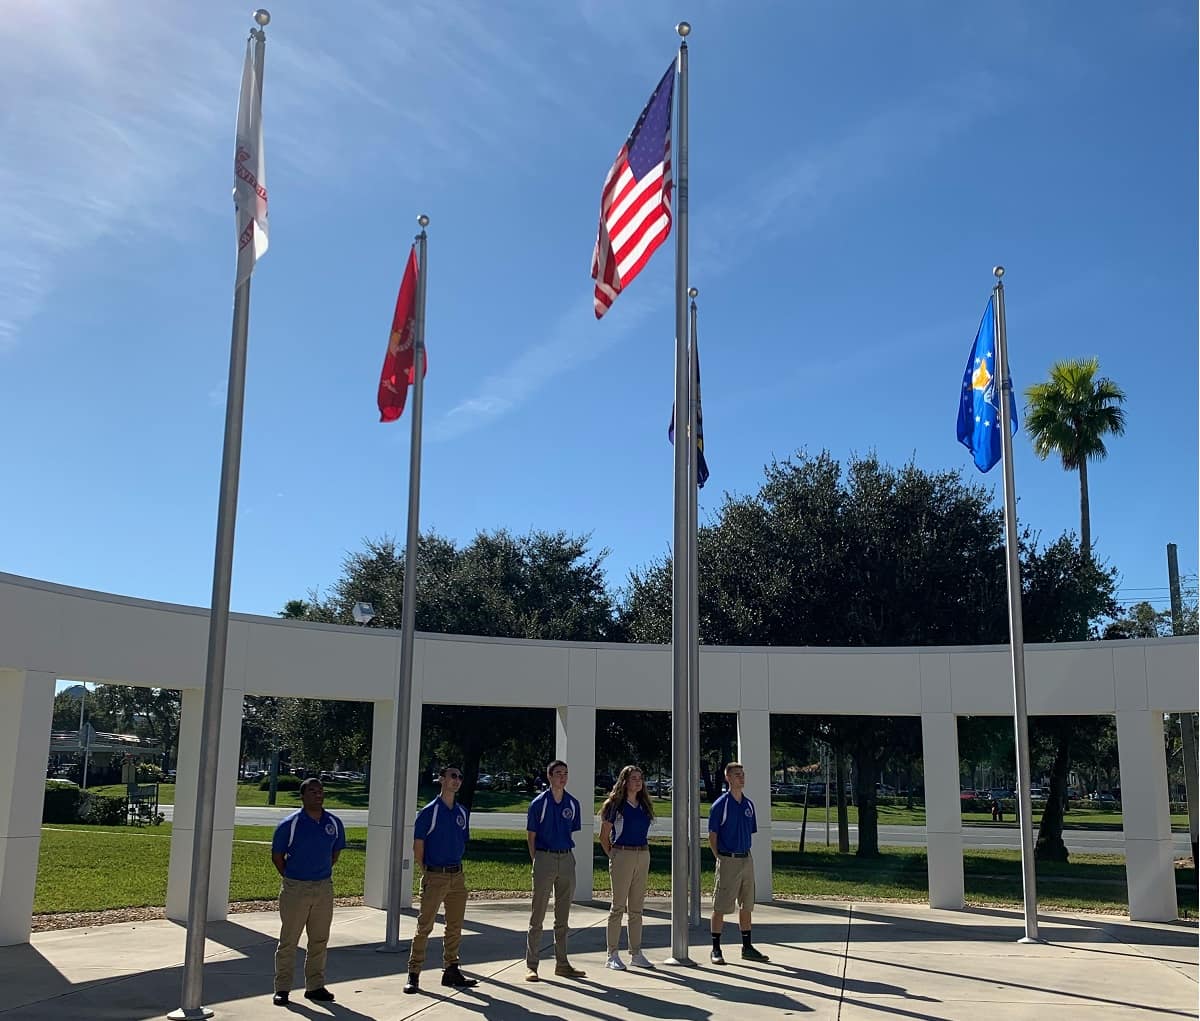 Cadets Marcell Gilliam, Doug Nguyen, Robert Kramer, Sarah Poole, and Ryan Bowen stand among the symbols of those who have come before them.” (Photo: Embry-Riddle/Olivia Shumbo)